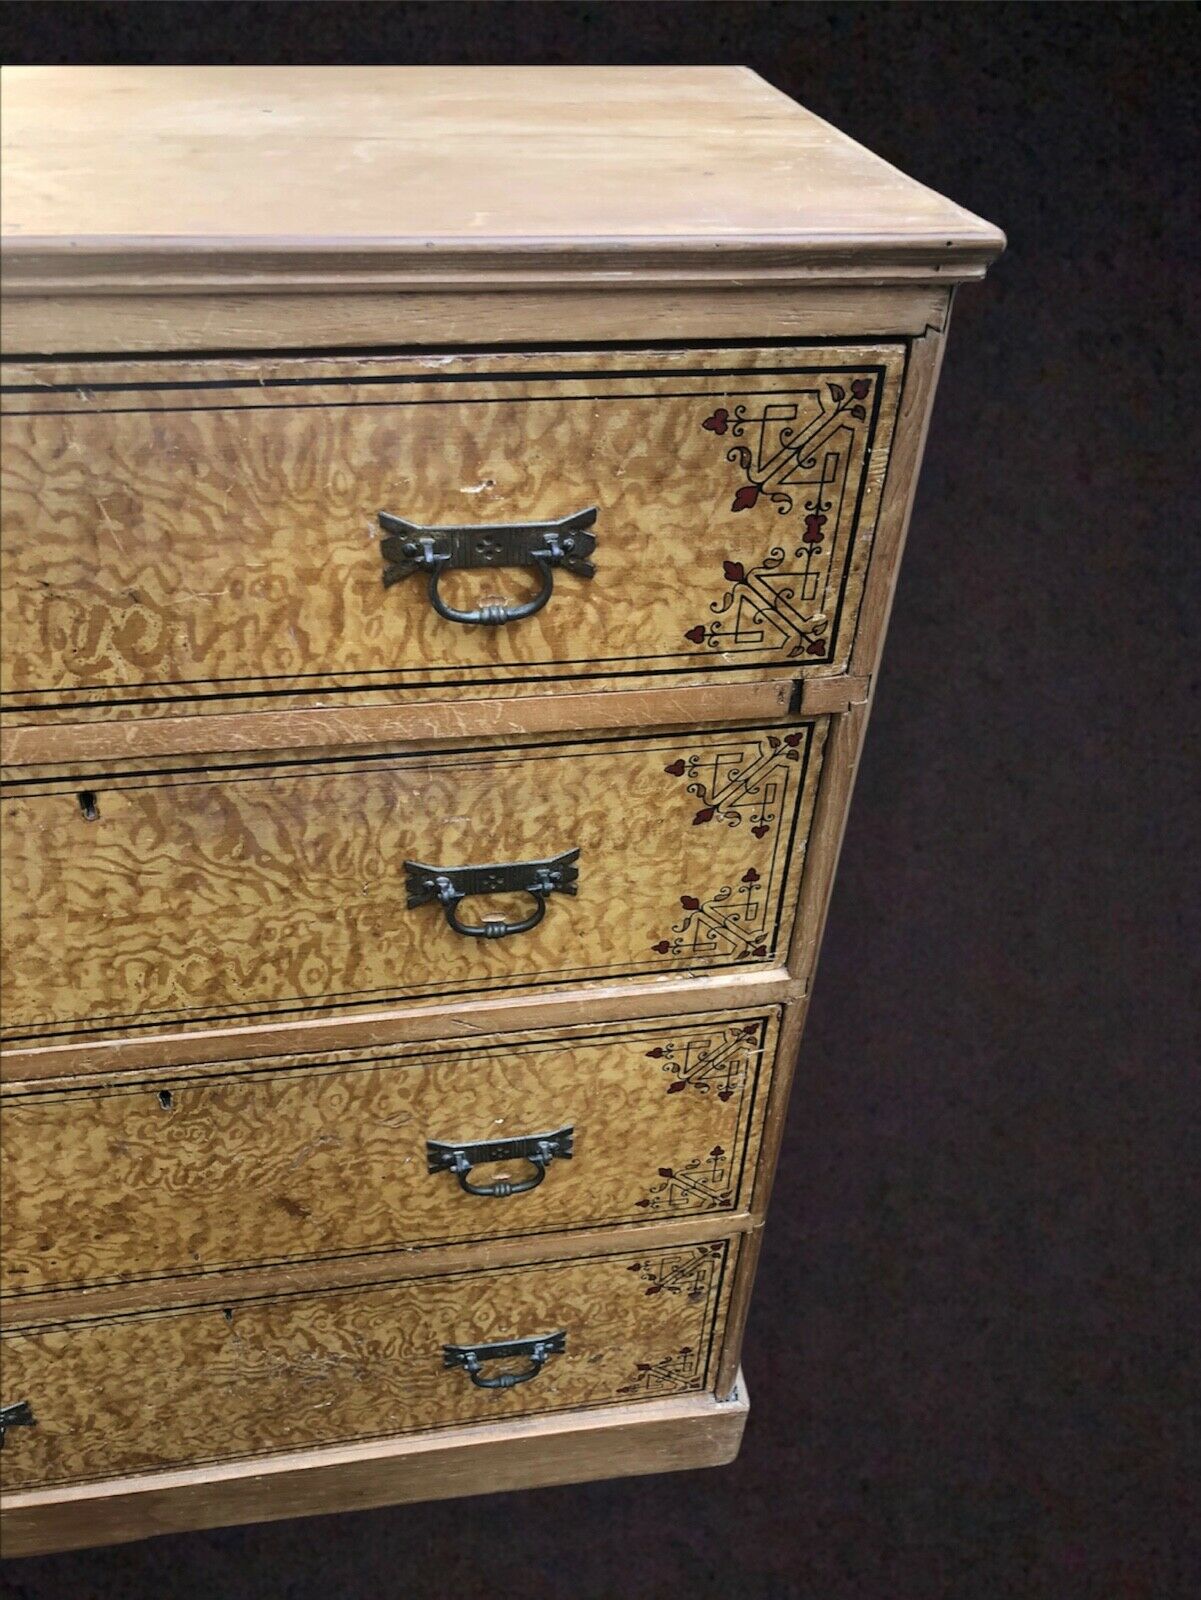 Handsome Edwardian Aesthetic Pine Chest Of Drawer ( SOLD )